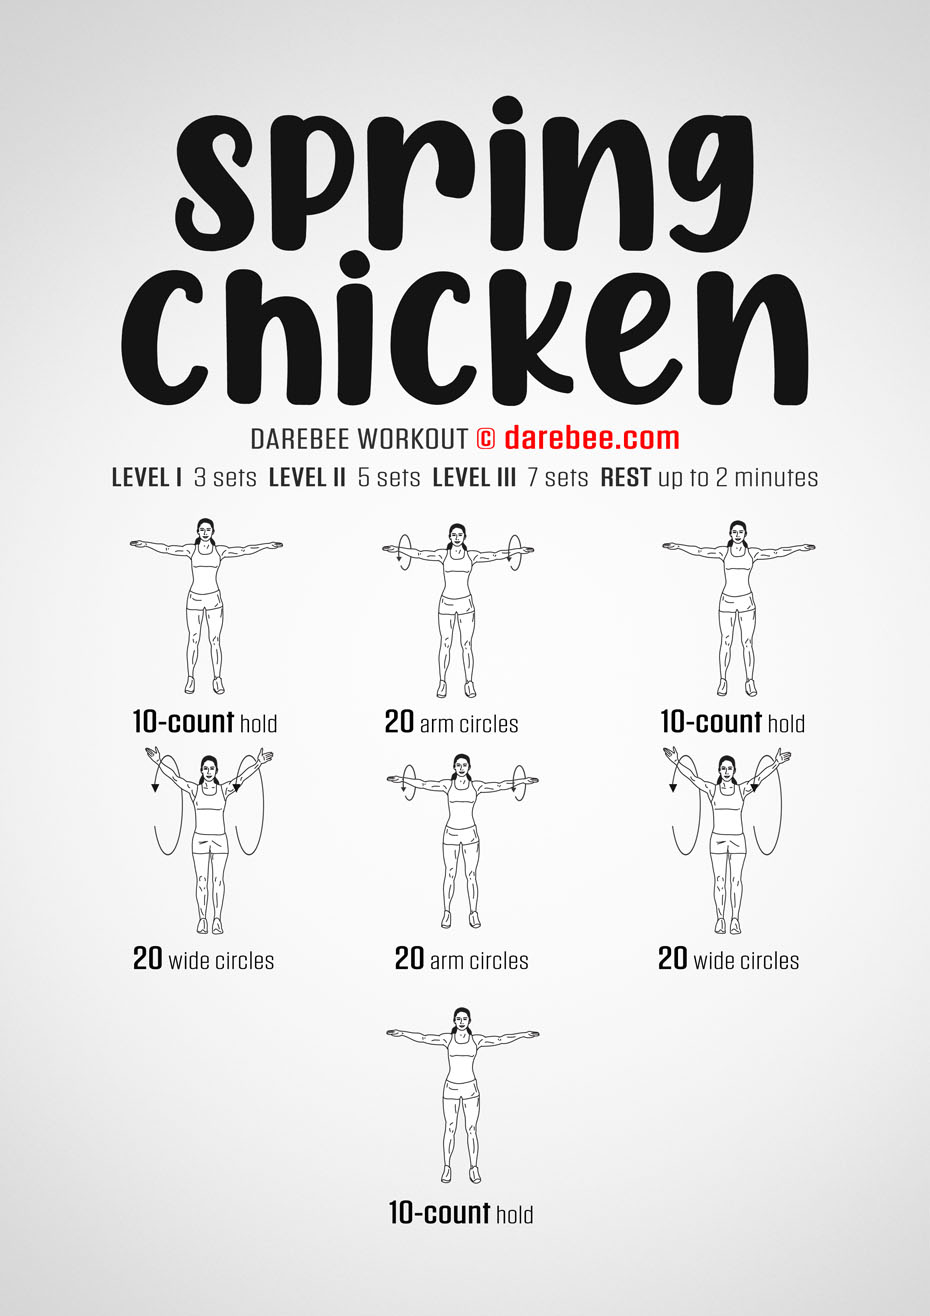 Spring Chicken is a Darebee home-fitness workout that will not tire you out and will help you decompress.